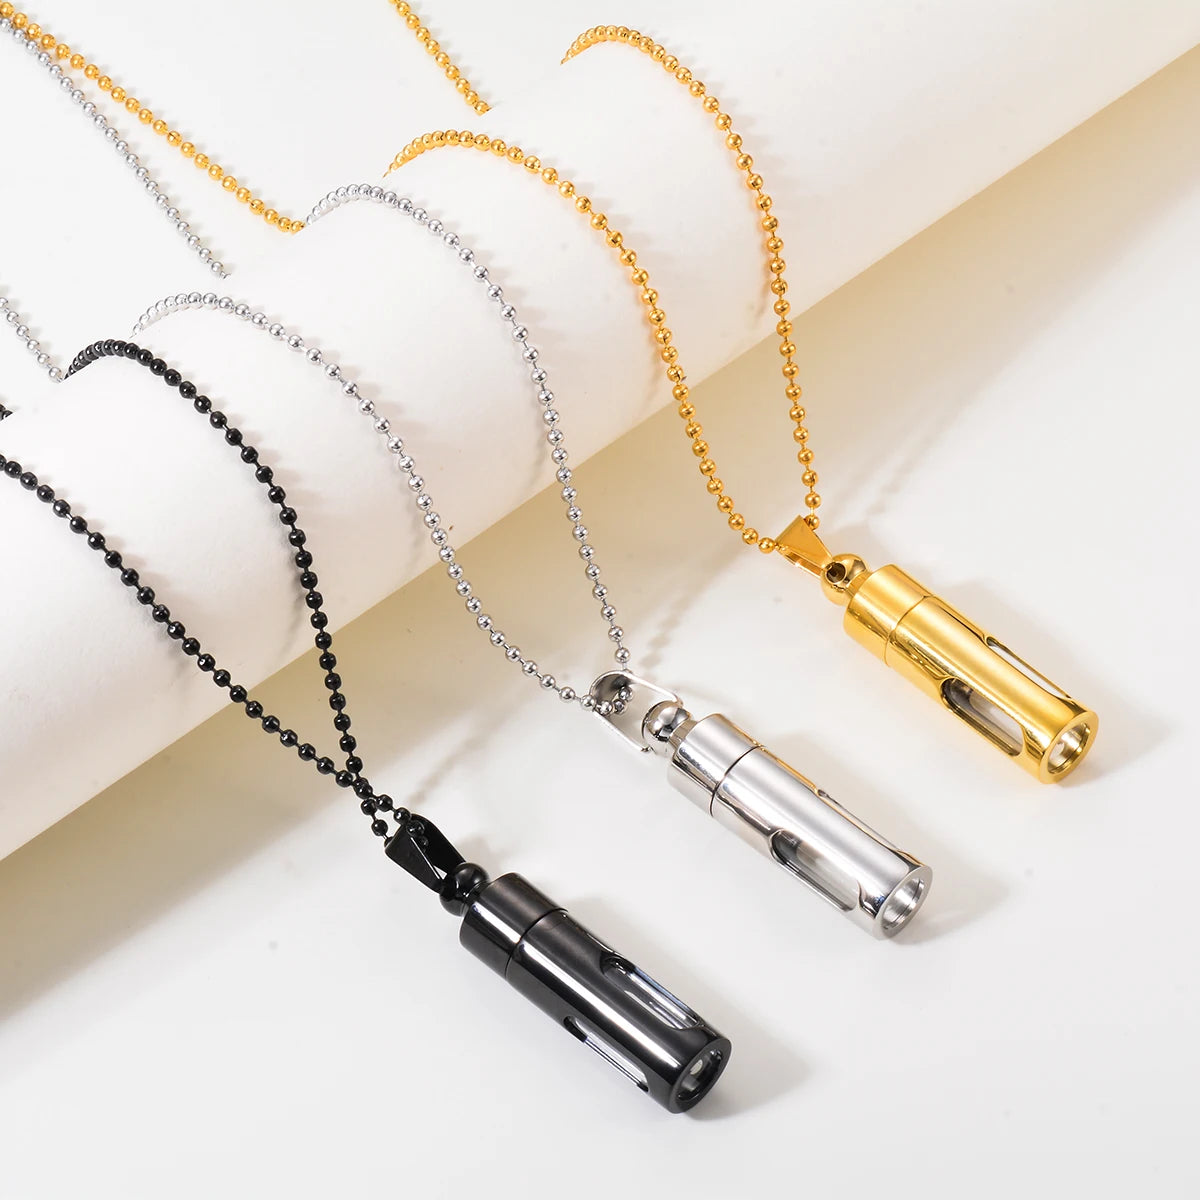 Glass Window Capsule Necklace + Funnel Fill